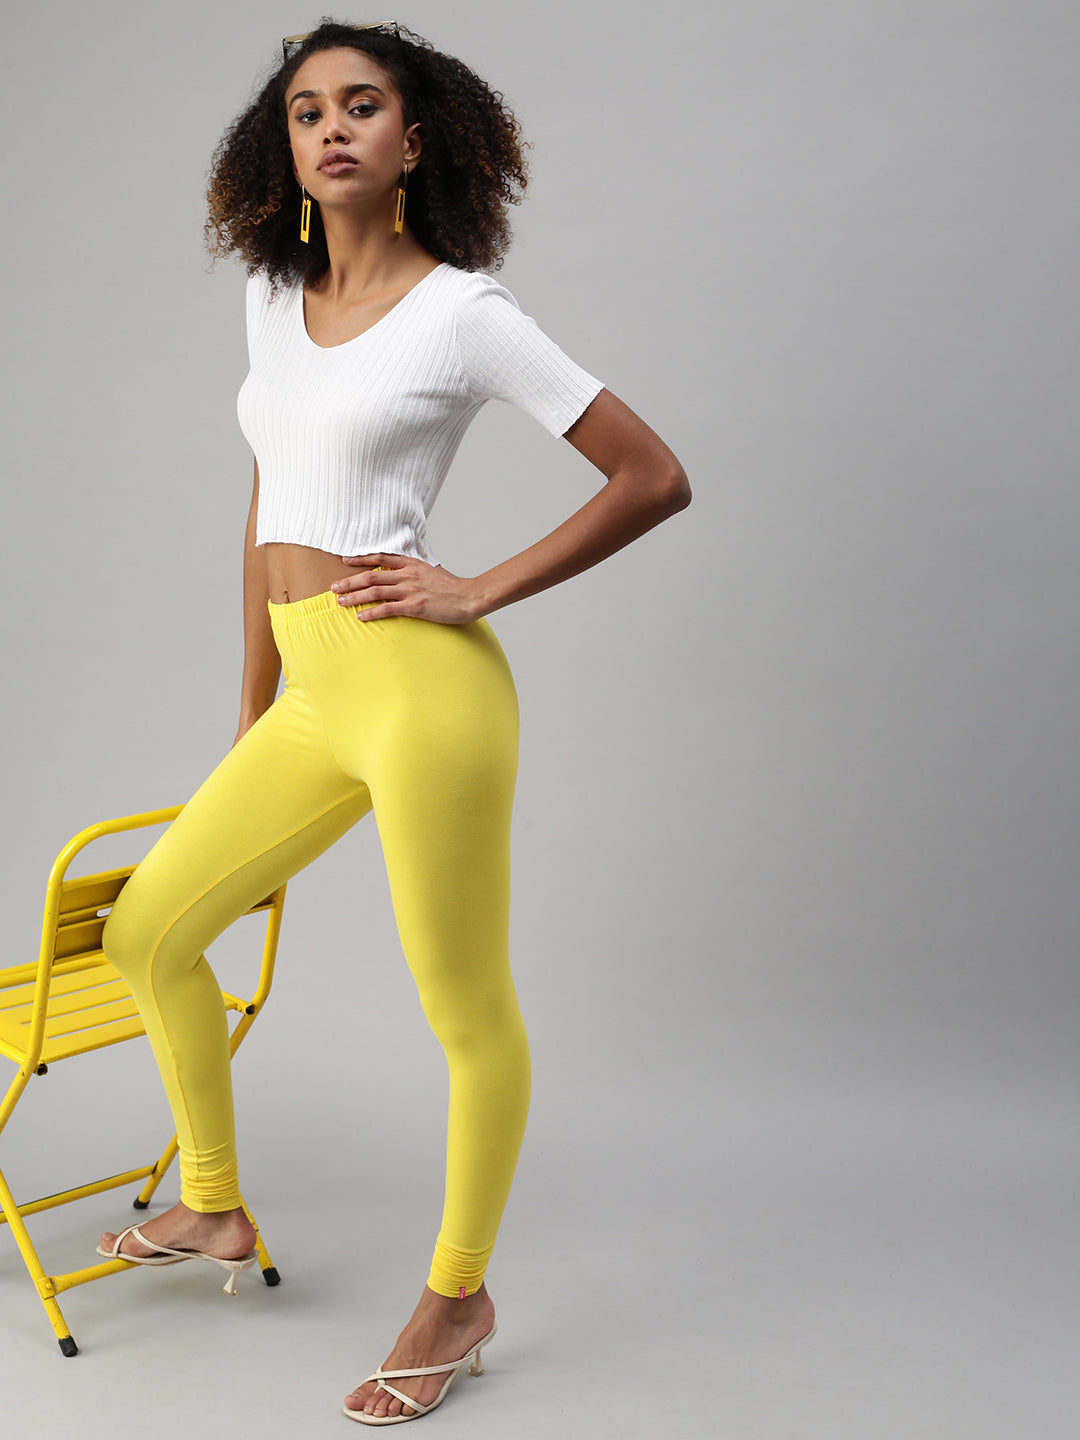 Lemon Yellow Women's Casual Leggings, Solid Color Colorful Ladies' Tights-Made  in USA/EU/MX | Leggings casual, Yellow leggings, Womens tights